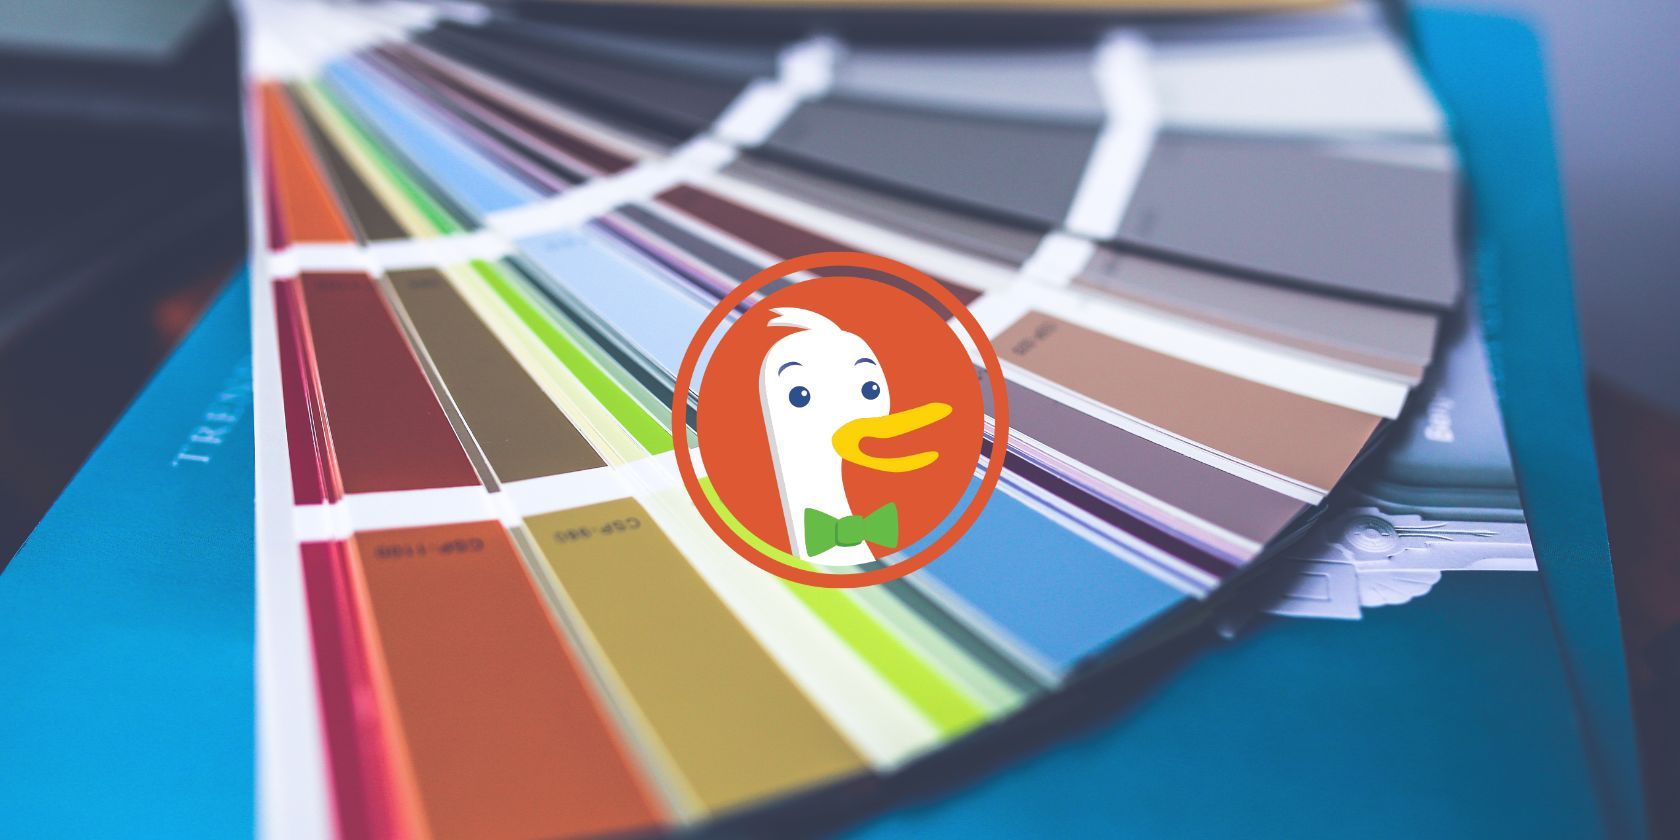 An image of the DuckDuckGo logo in the center with a color palette background